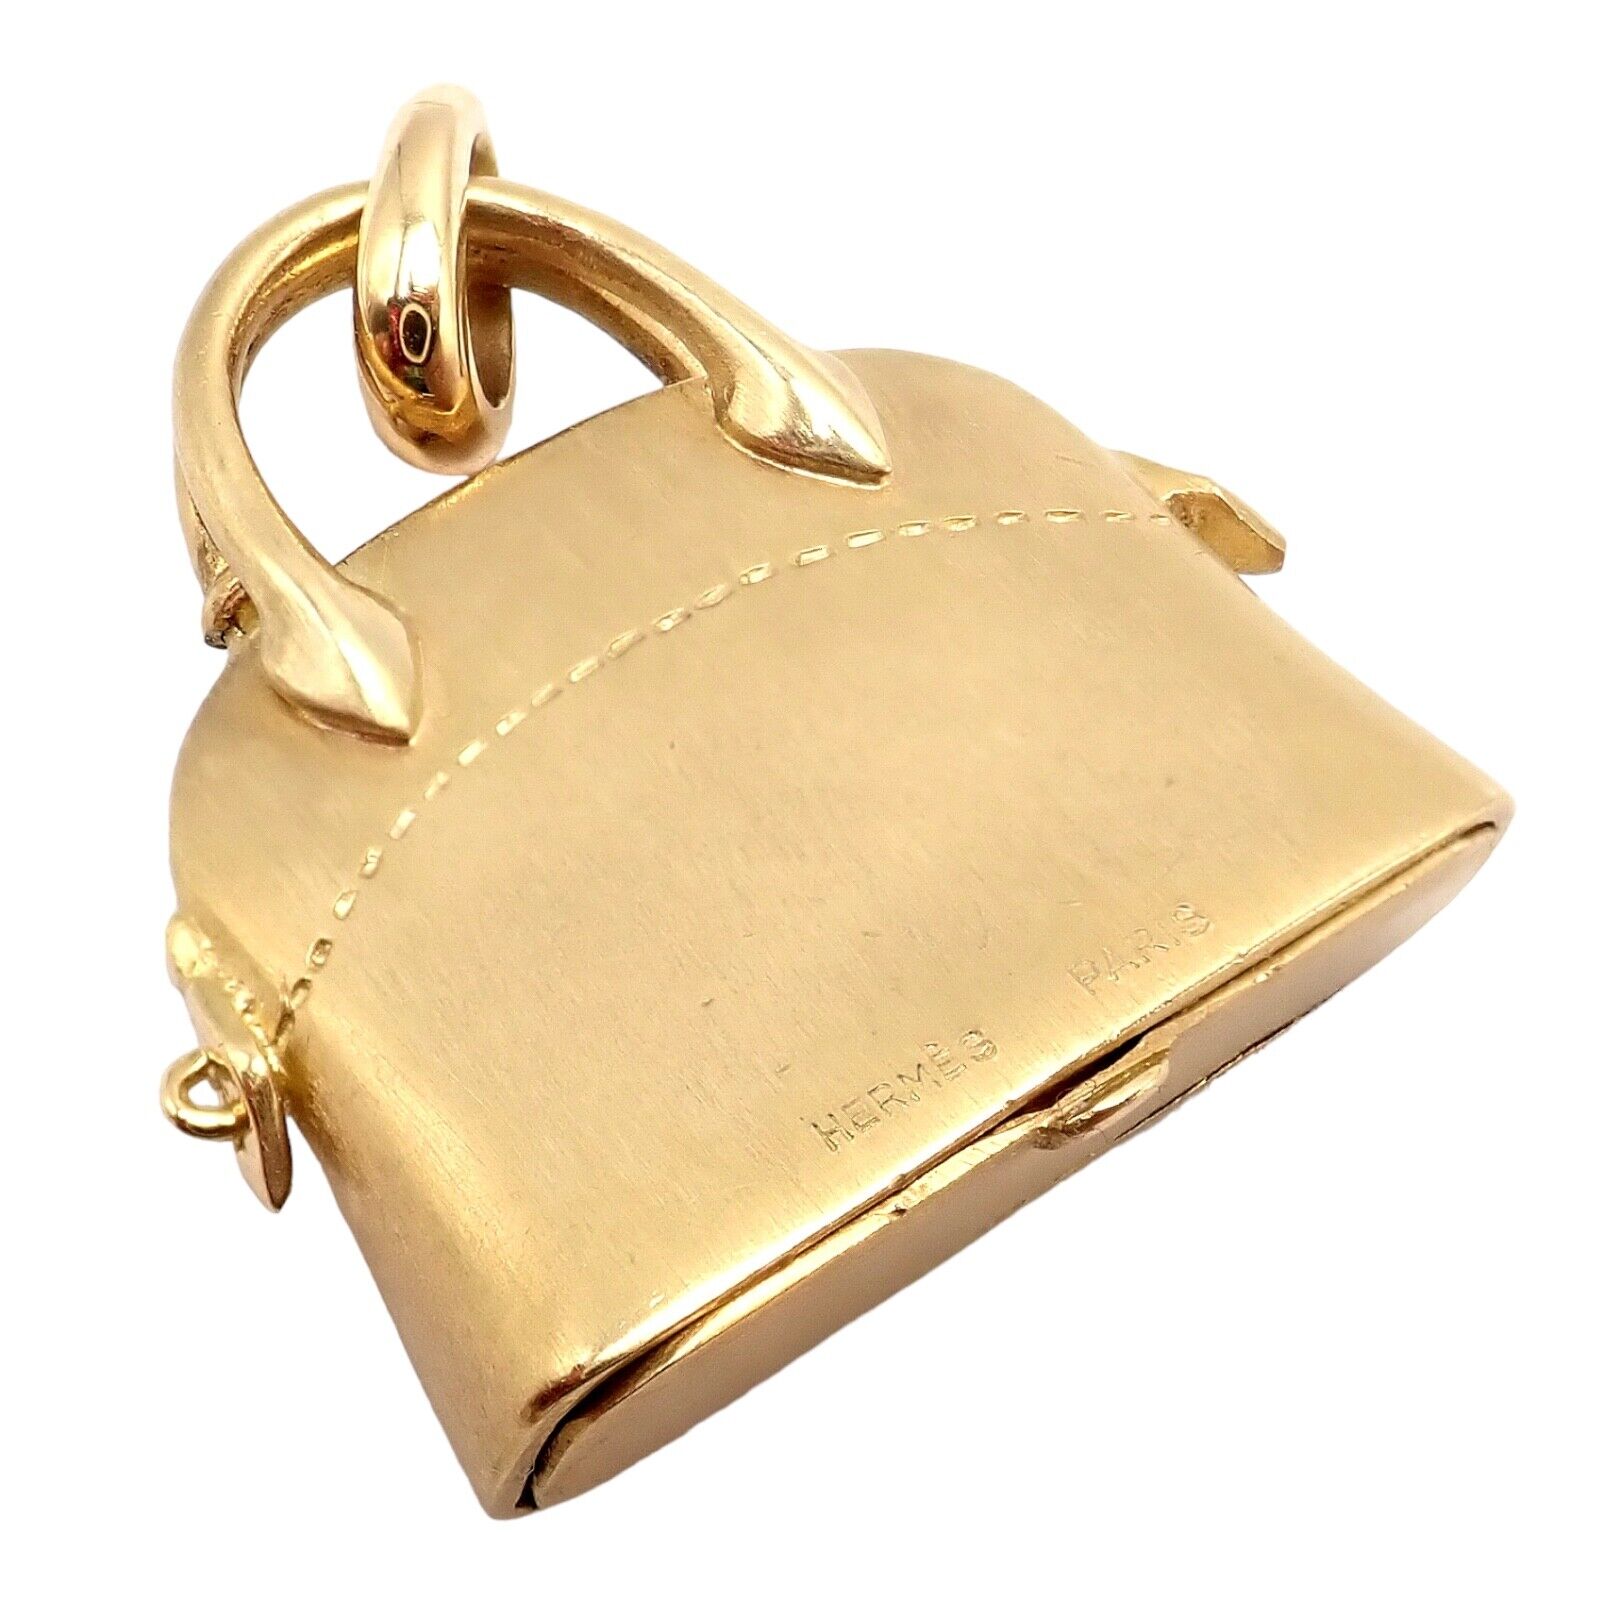 Rare! Authentic Hermes Bolide 18k Yellow Gold Bag Purse Large Charm Pendant